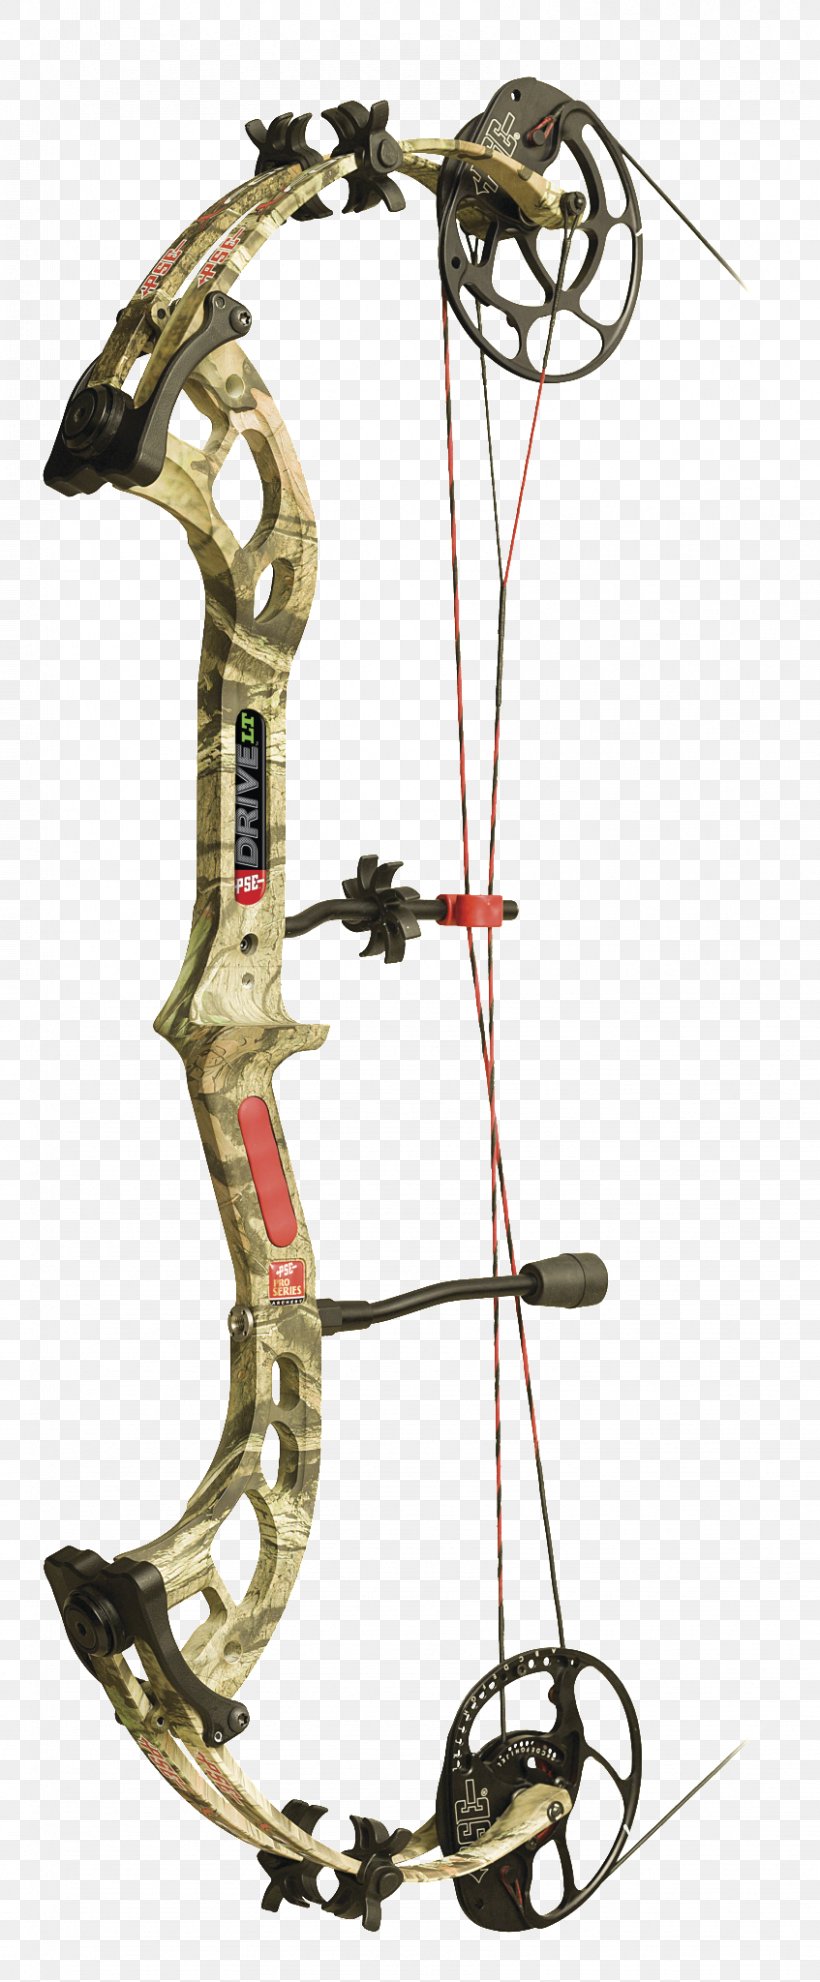 PSE Archery Bow And Arrow Compound Bows Crossbow, PNG, 847x2048px, Pse Archery, Archery, Bow, Bow And Arrow, Bowfishing Download Free